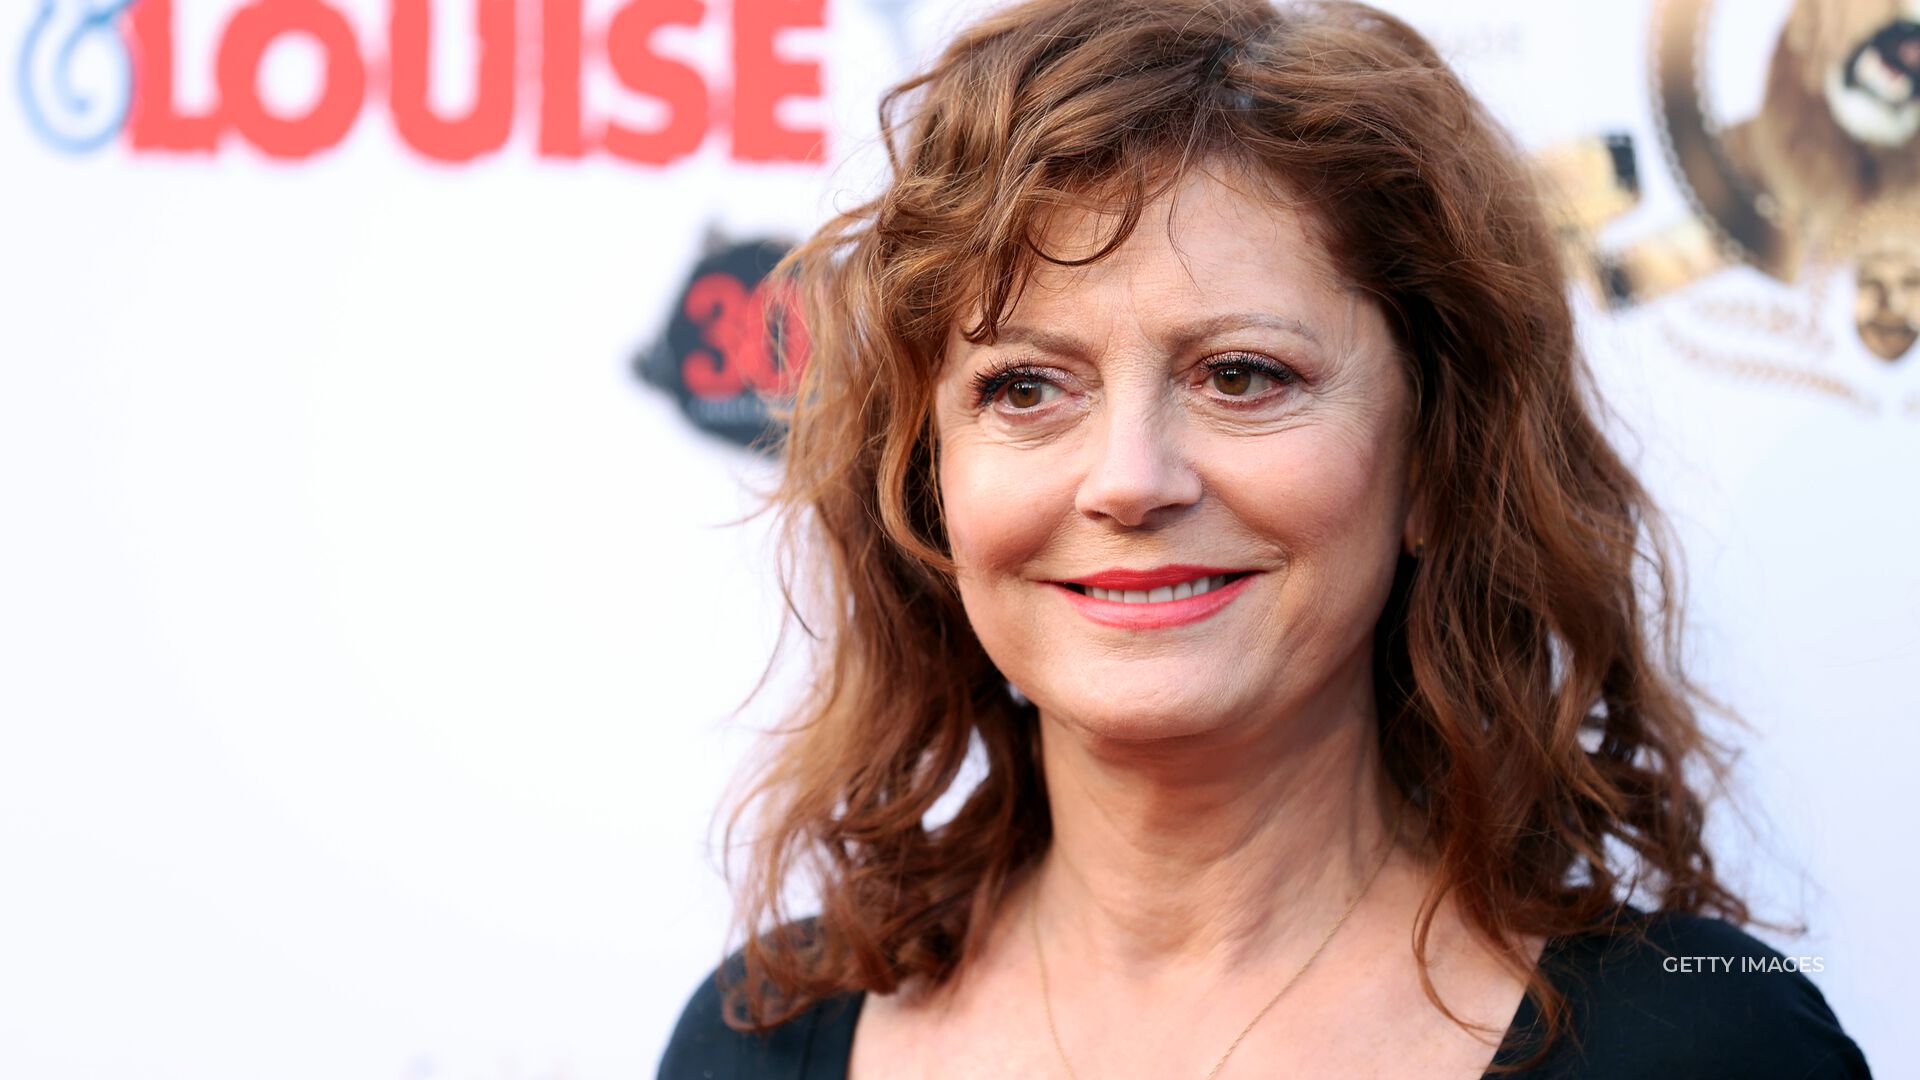 Susan Sarandon is facing backlash for a tweet she sent about an officer funeral.